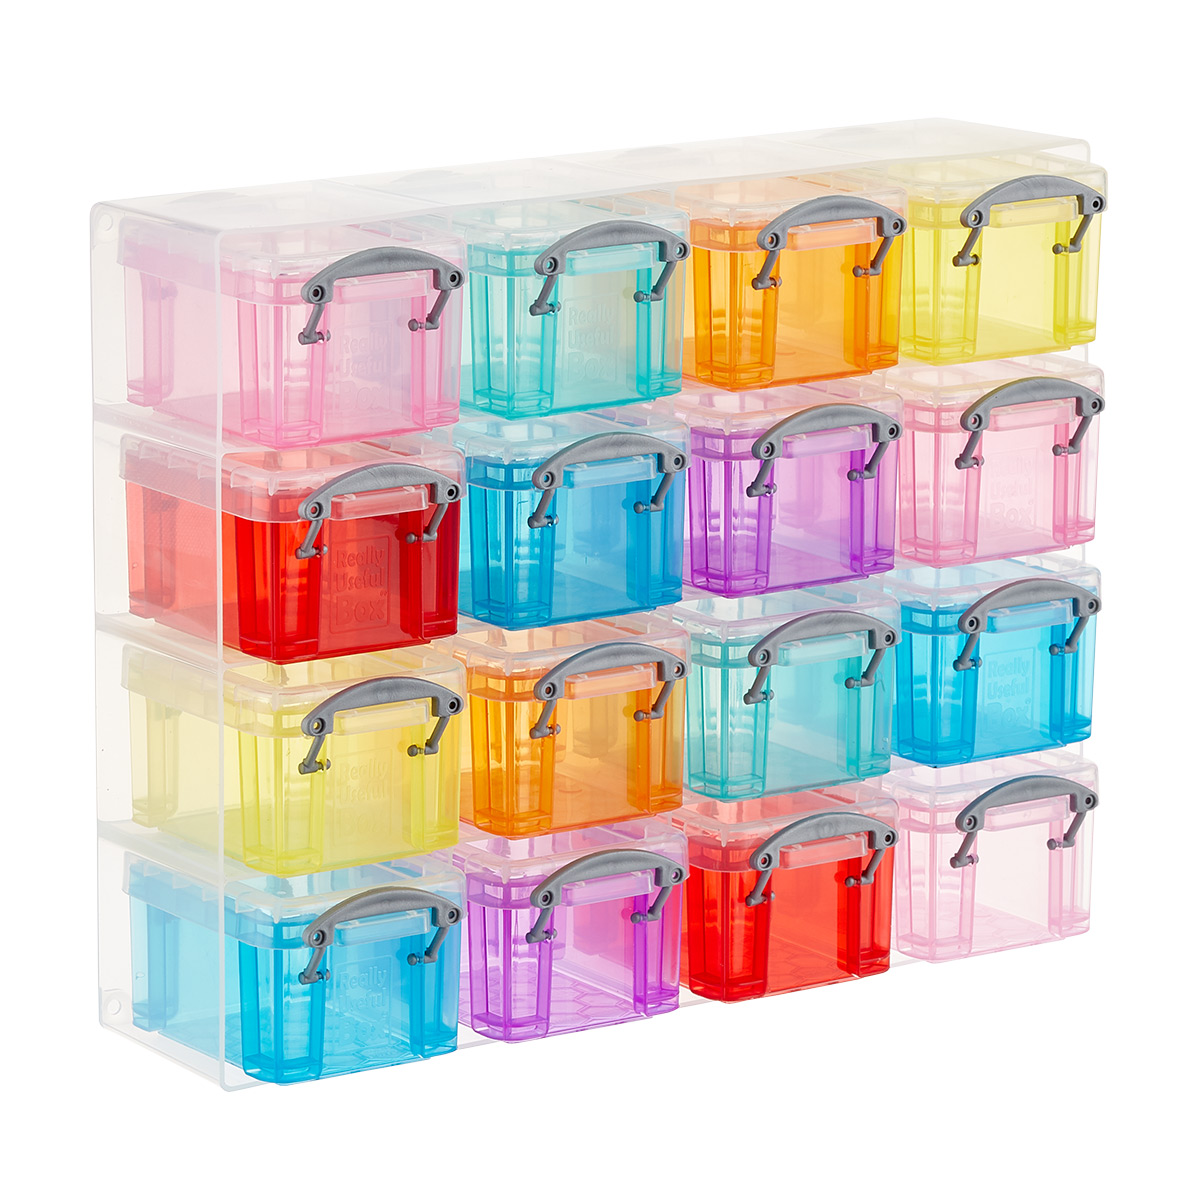 16-Latch Box Small Parts Organizer | The Container Store